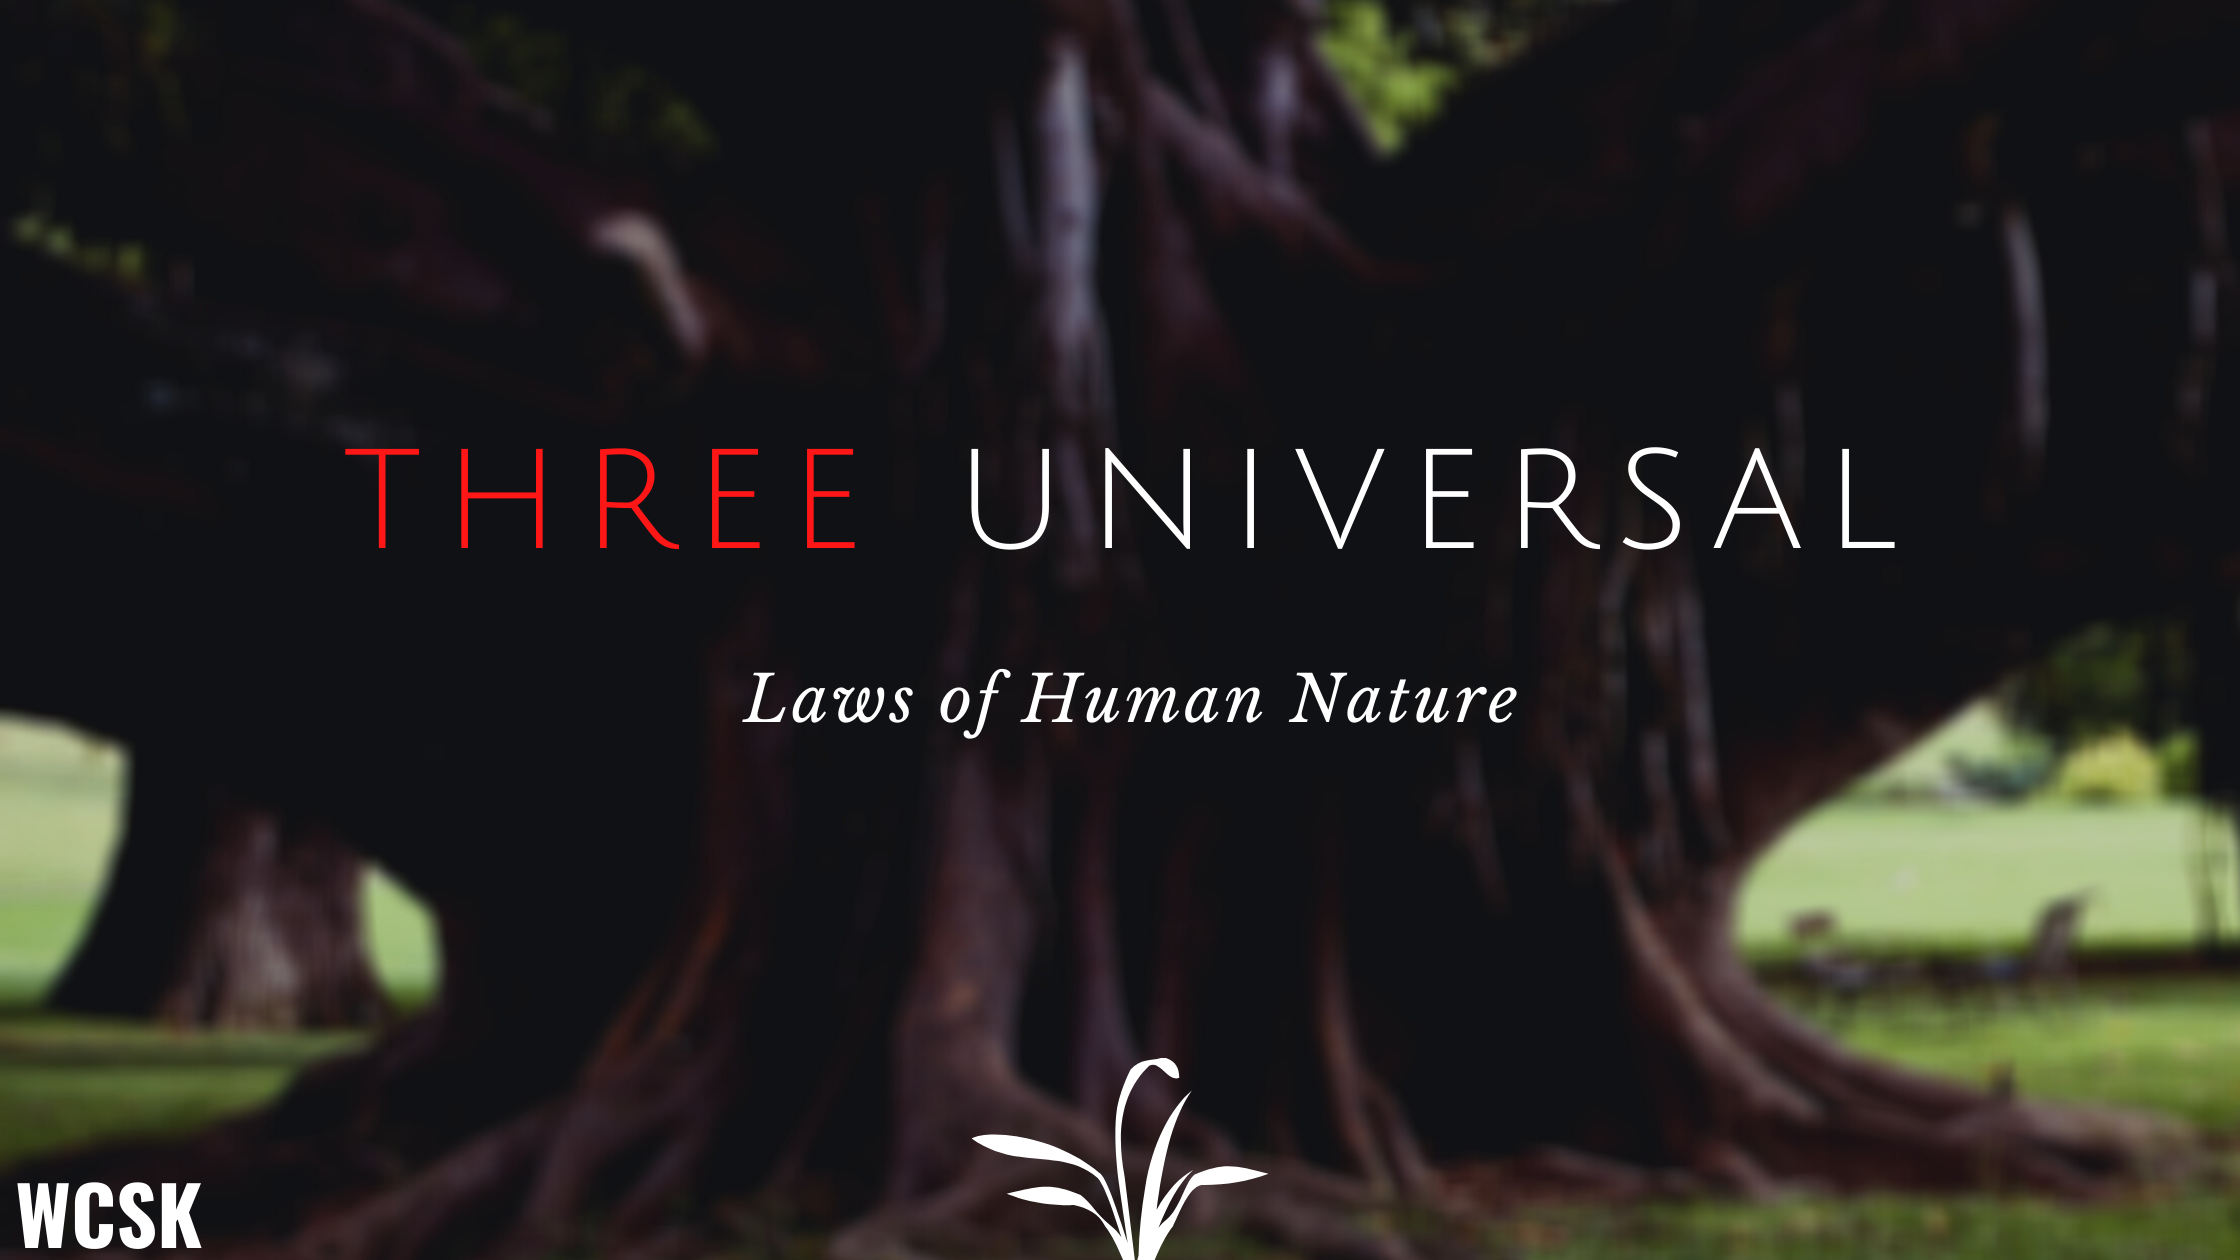 The Three Universal Laws of Human Nature